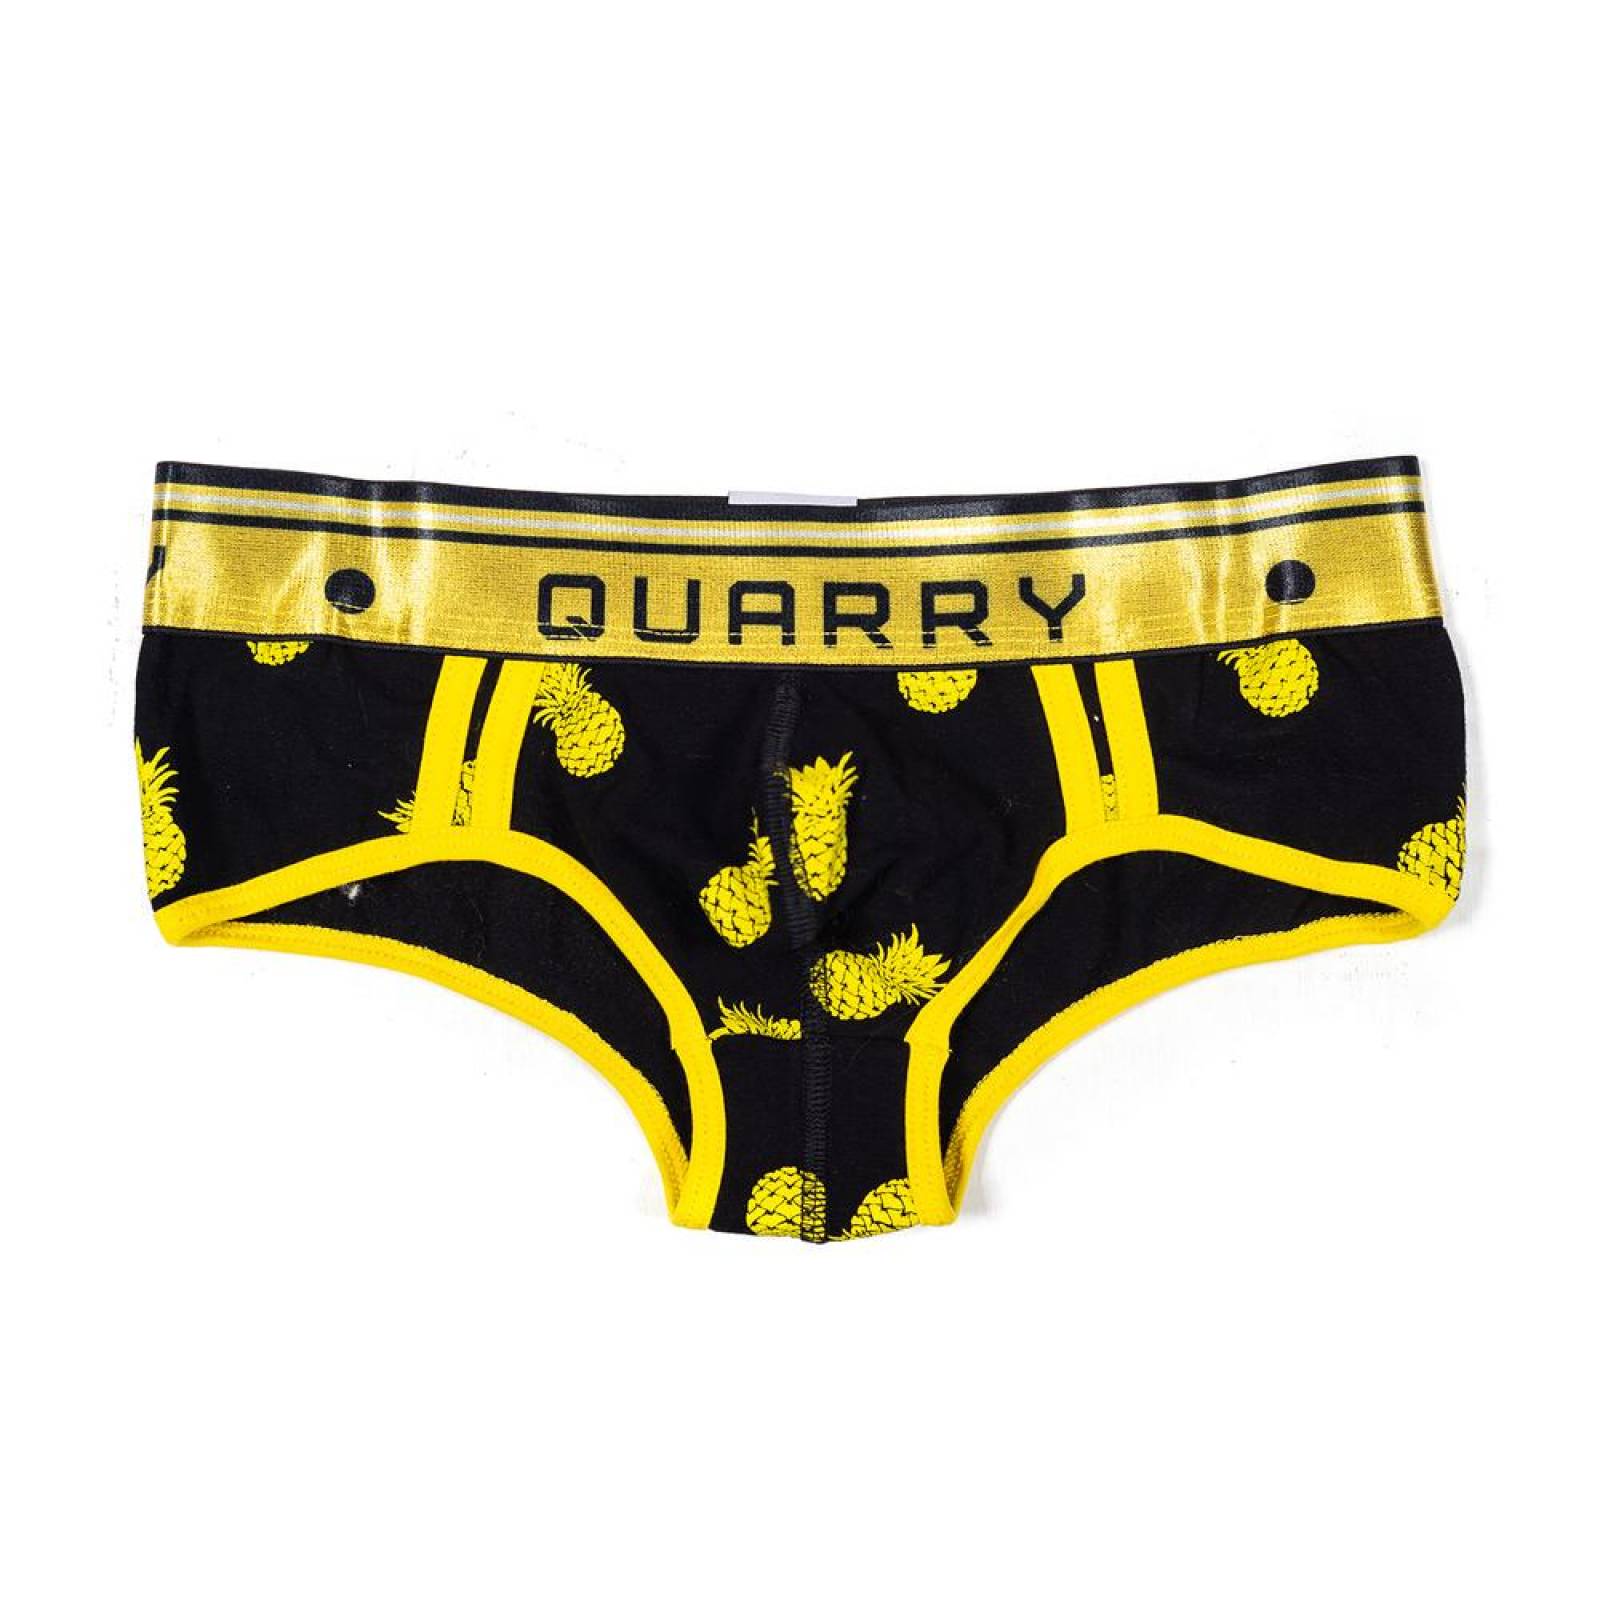 BOXER ANDY QUARRY JEANS